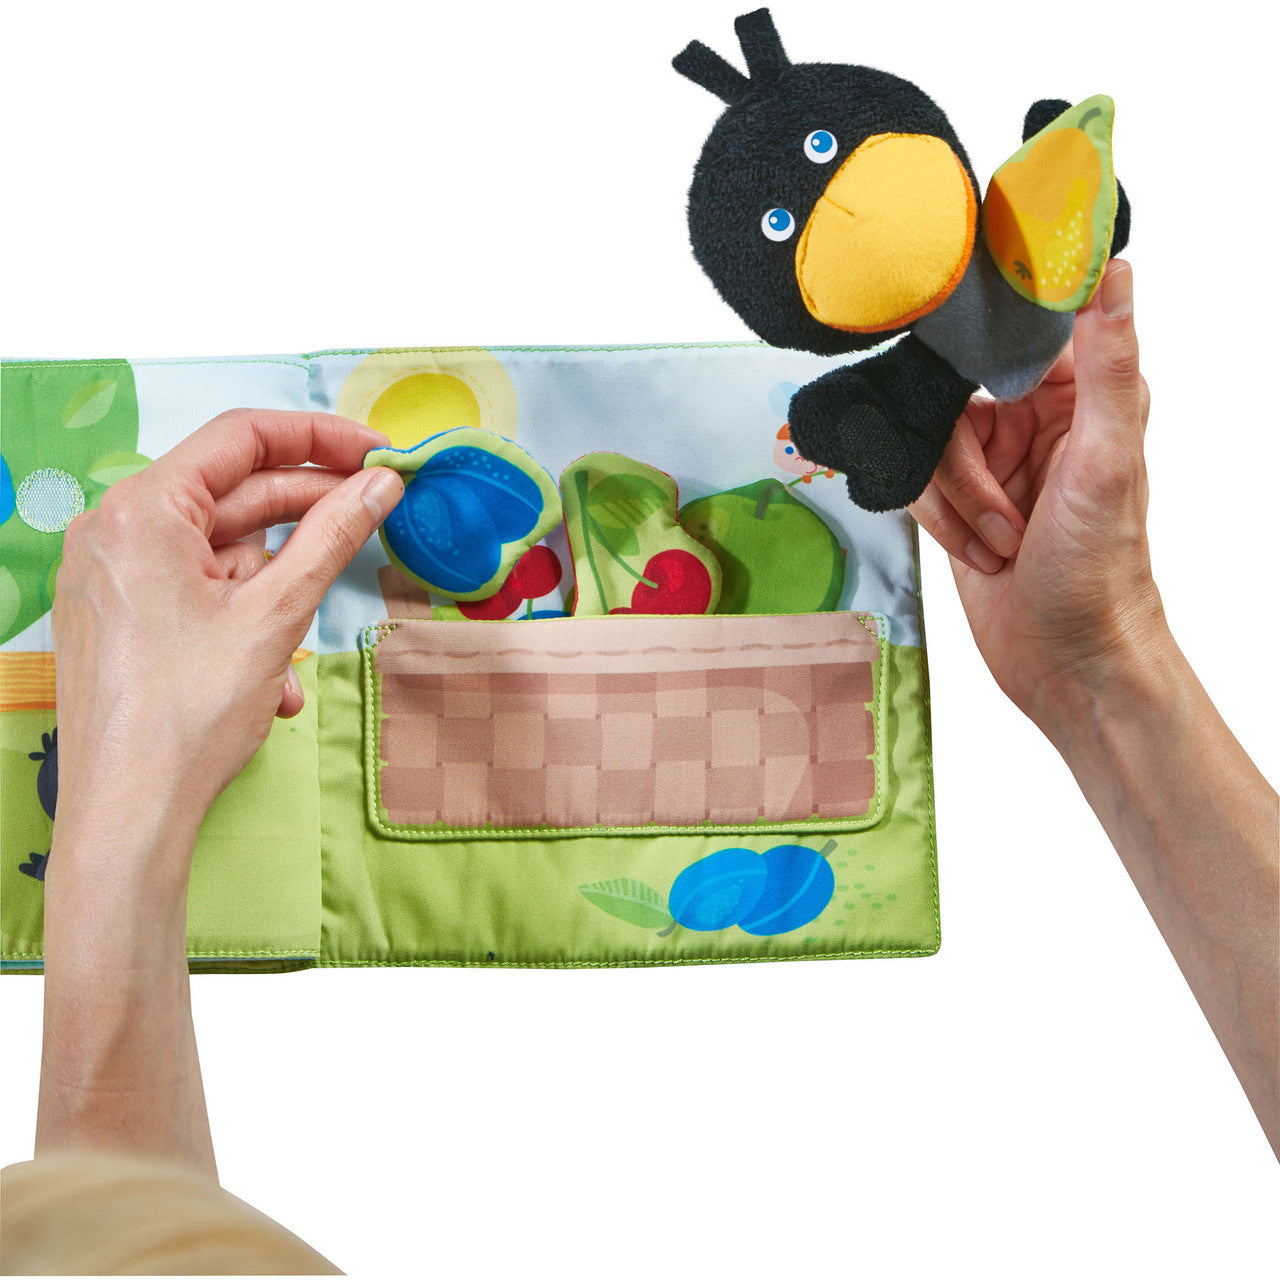 Orchard Fabric Baby Book with Raven Finger Puppet